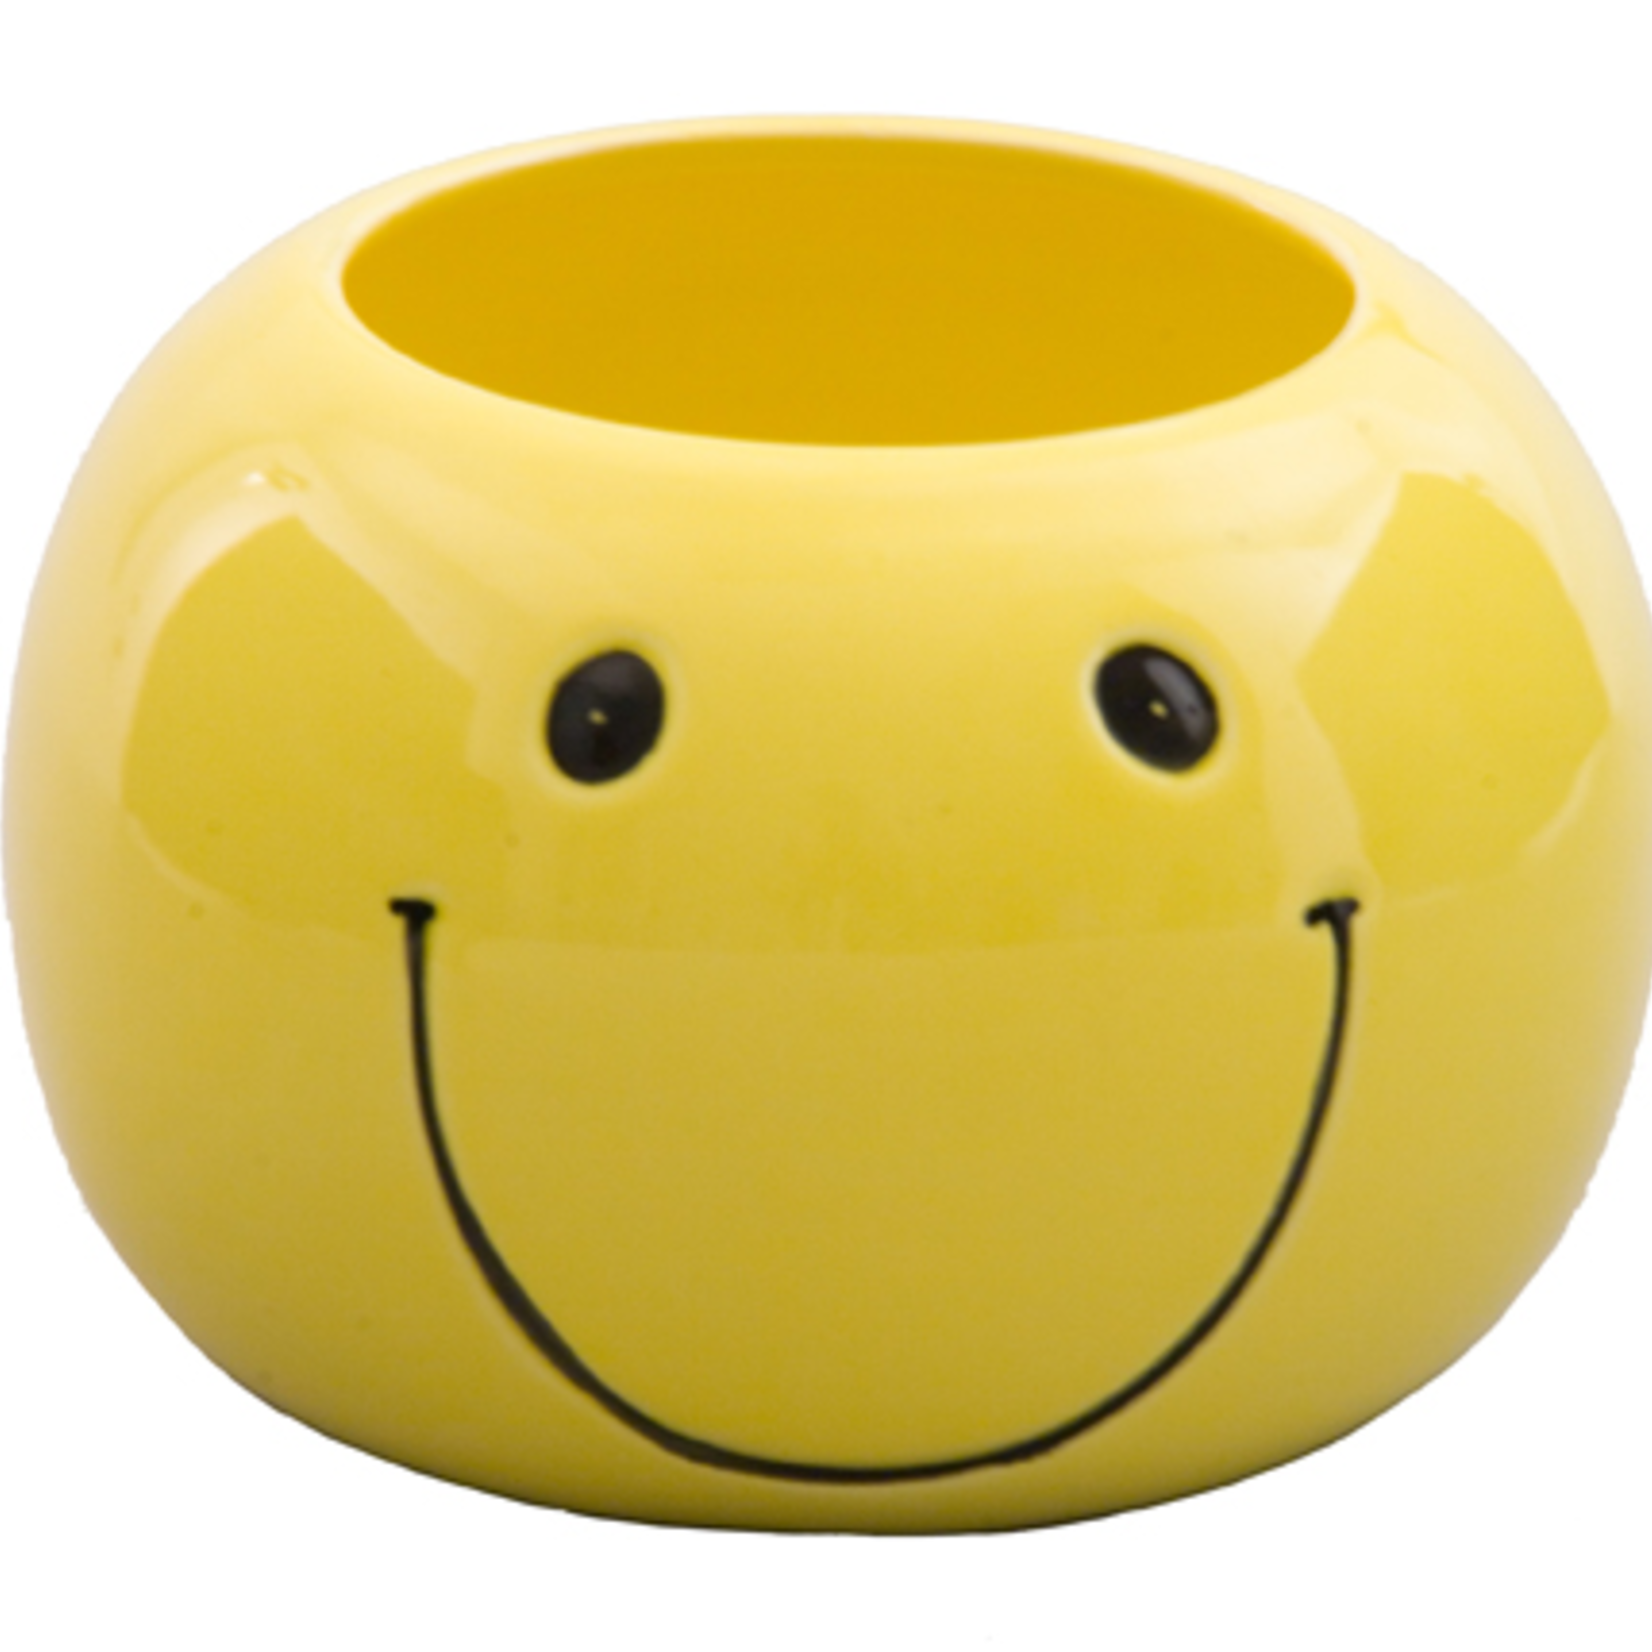 4"H X 3.5" Happy Face Round Bowl